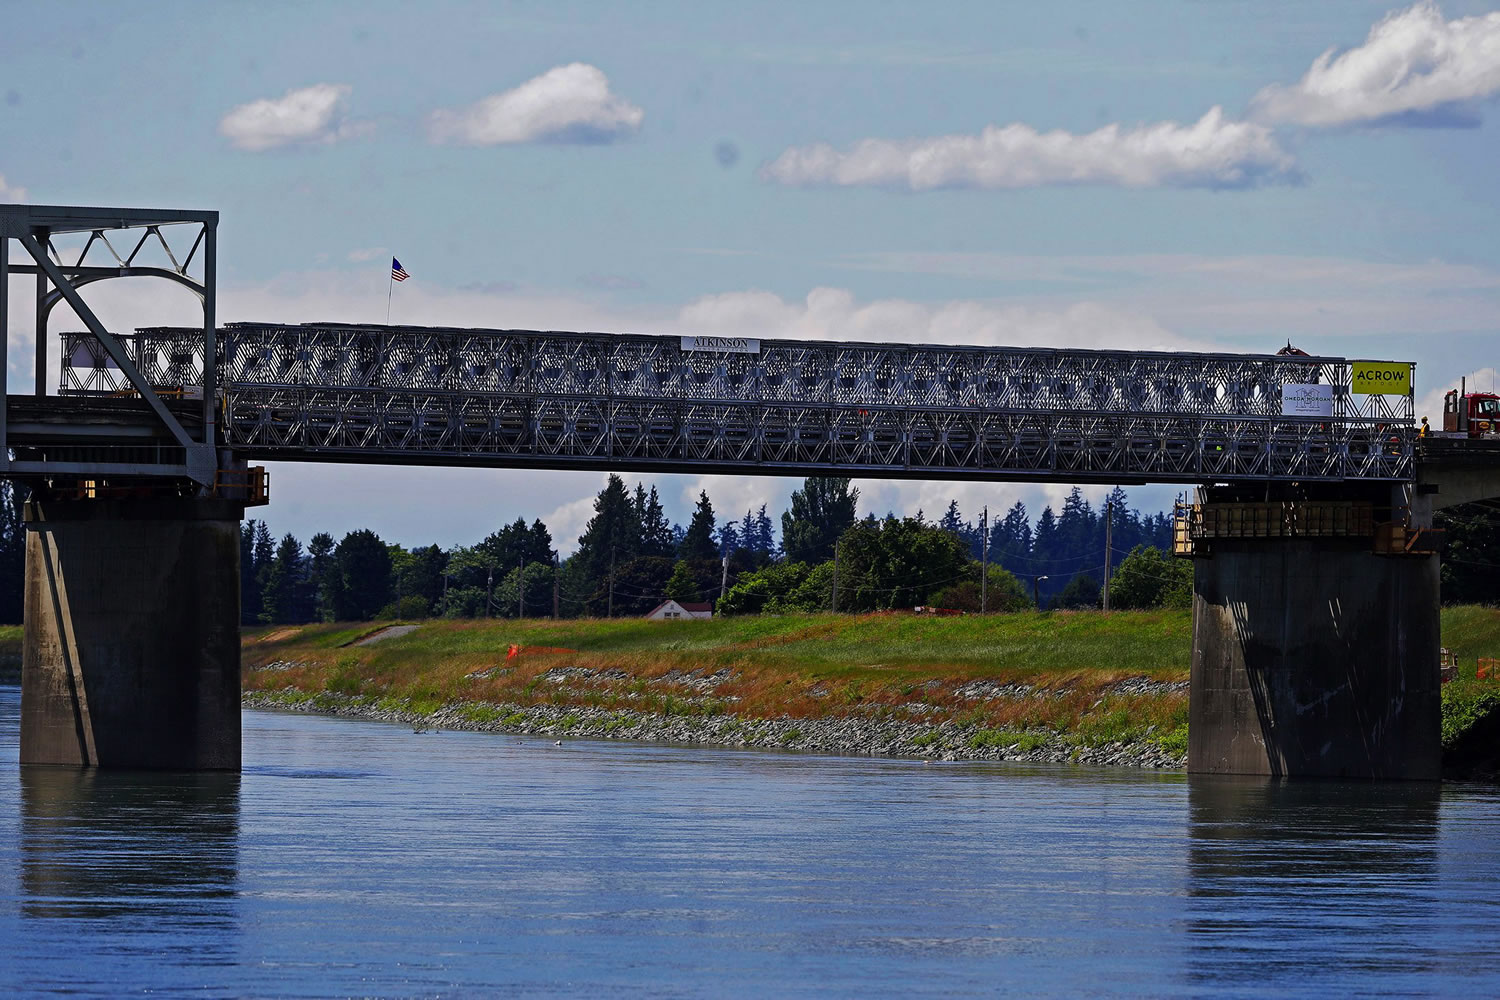 The temporary I-5 bridge constructed by Acrow Bridges is completed over the Skagit river.